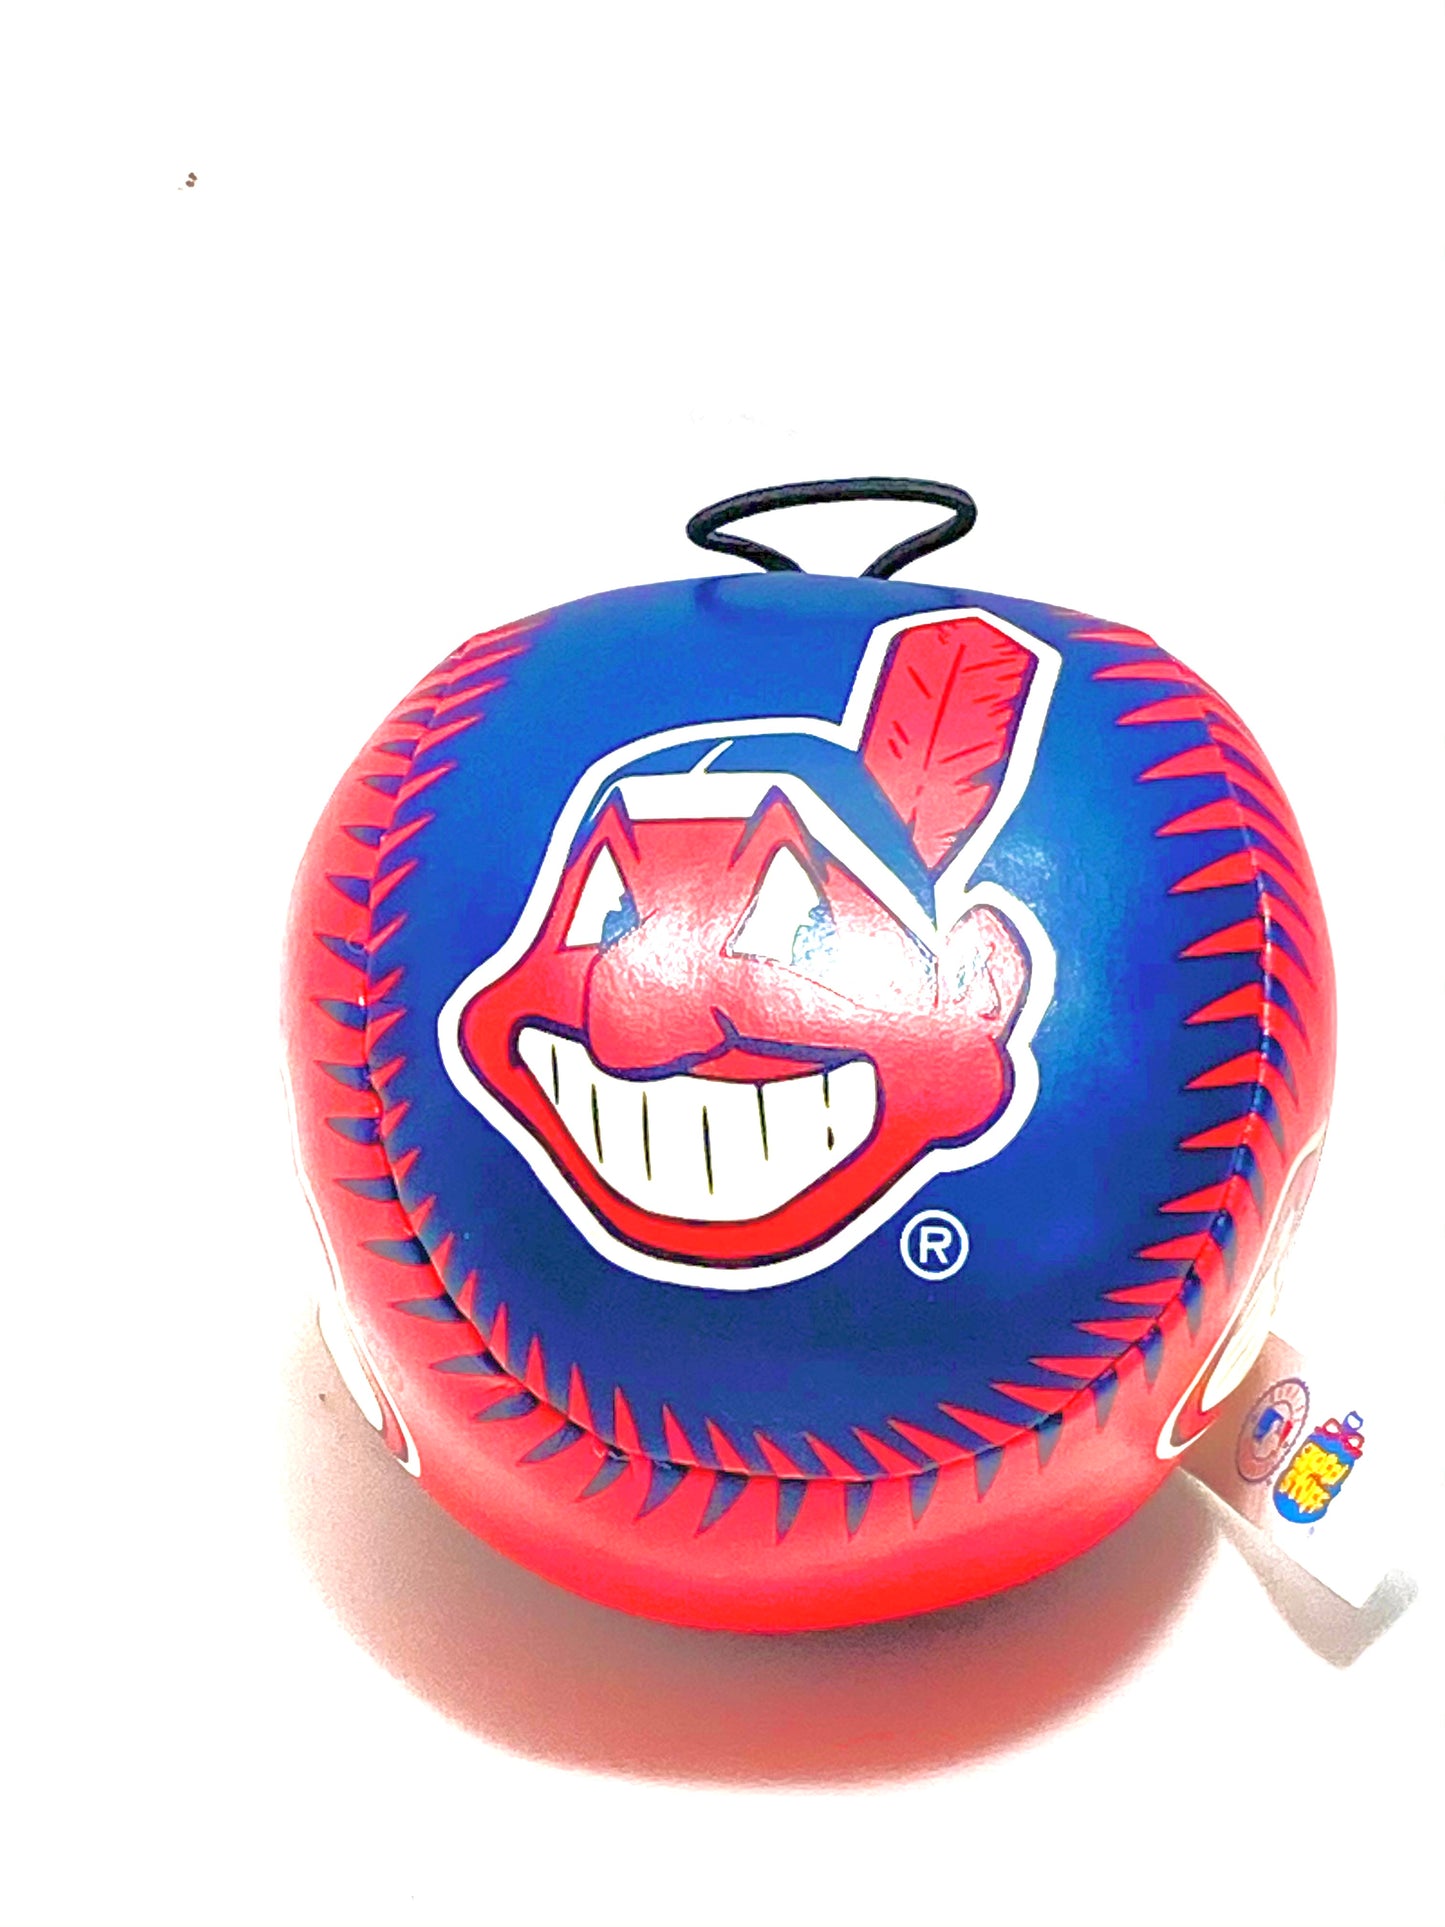 Cleveland Indians Vintage 2000 MLB Mush Ball/Ornament by Good Stuff Corp.